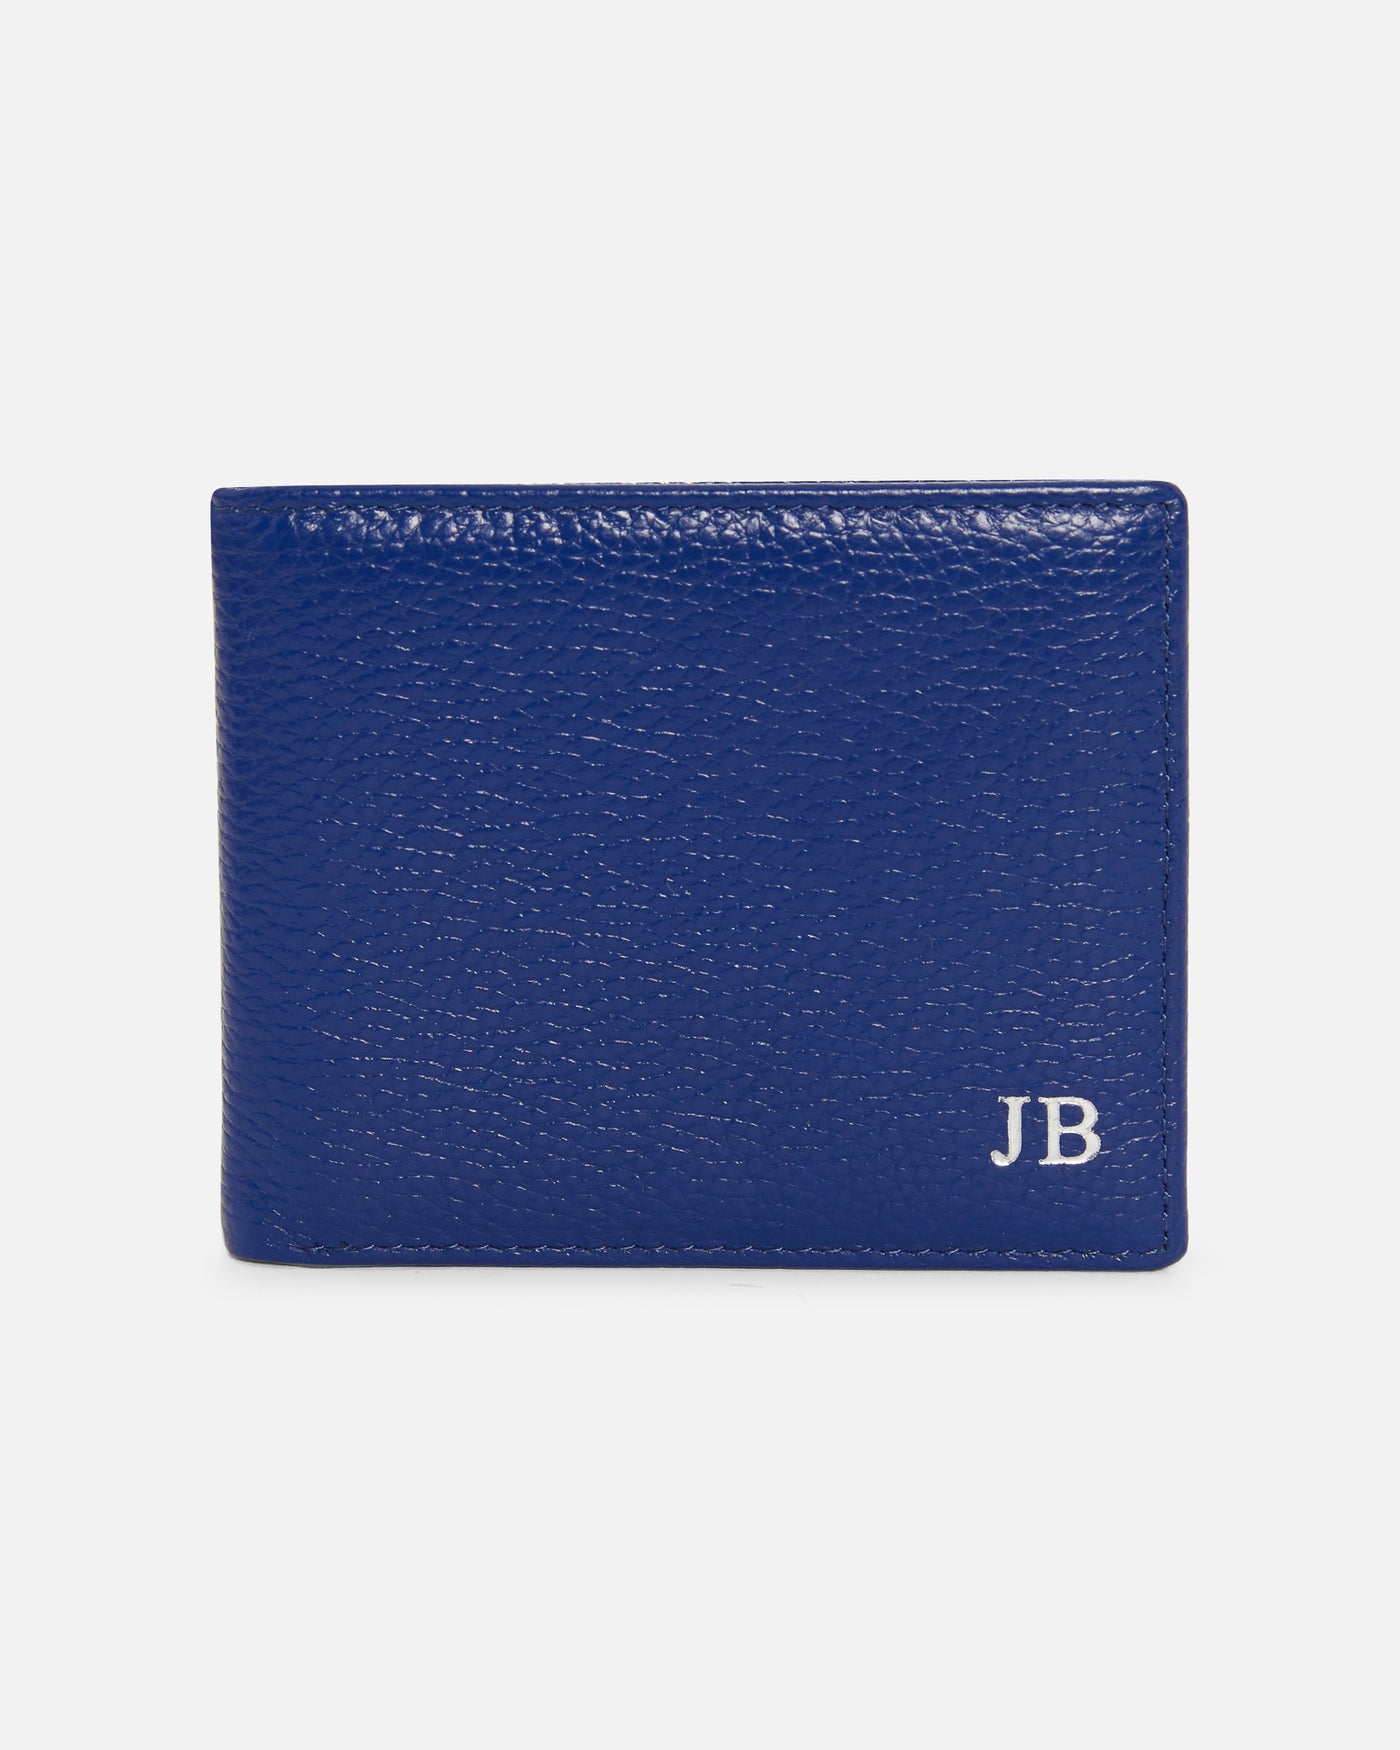 blue pebble leather wallet embossed with gold initials